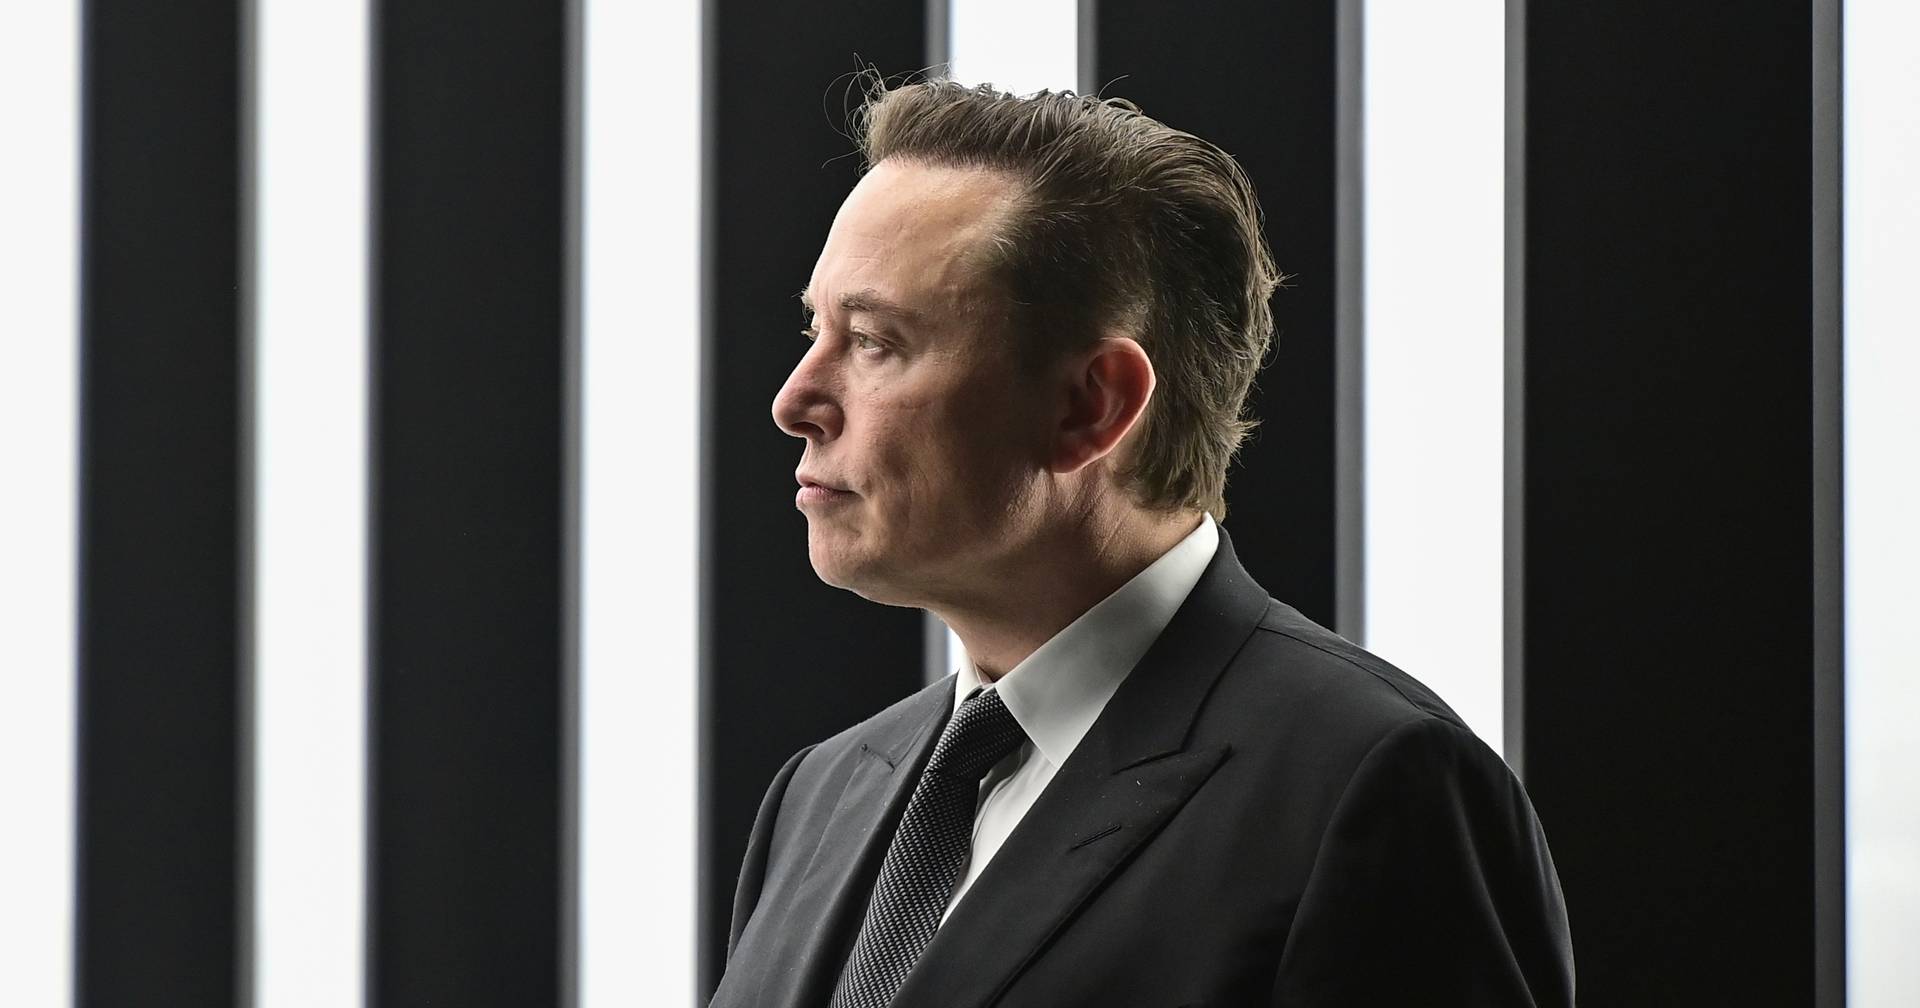 An 'extremely tough' commitment or a layoff?  Musk forces Twitter employees to choose